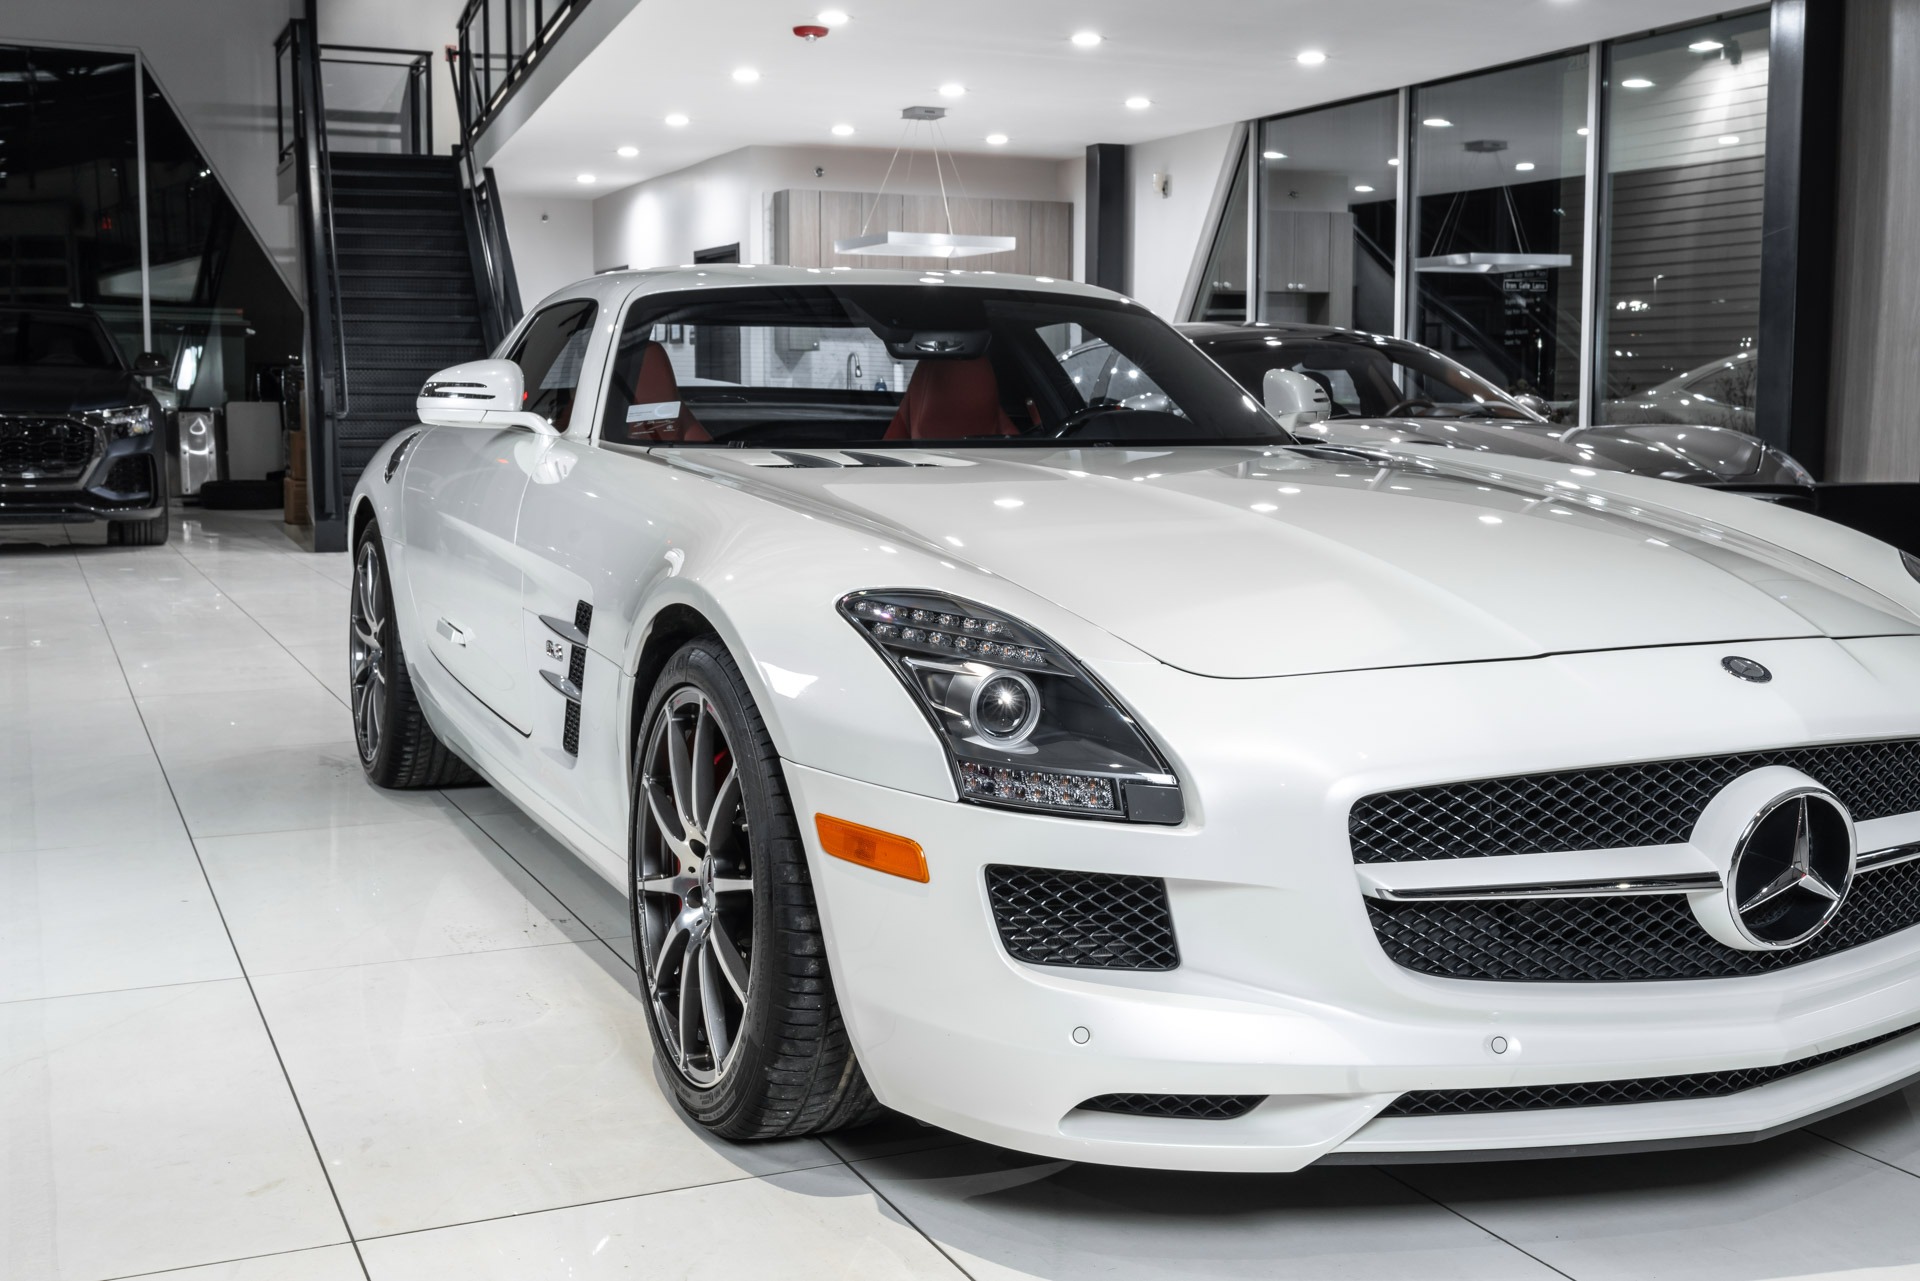 Used-2012-Mercedes-Benz-SLS-AMG-RARE-Gullwing-Coupe-BEST-Color-Combo-Carbon-Fiber-Interior-Collector-Car